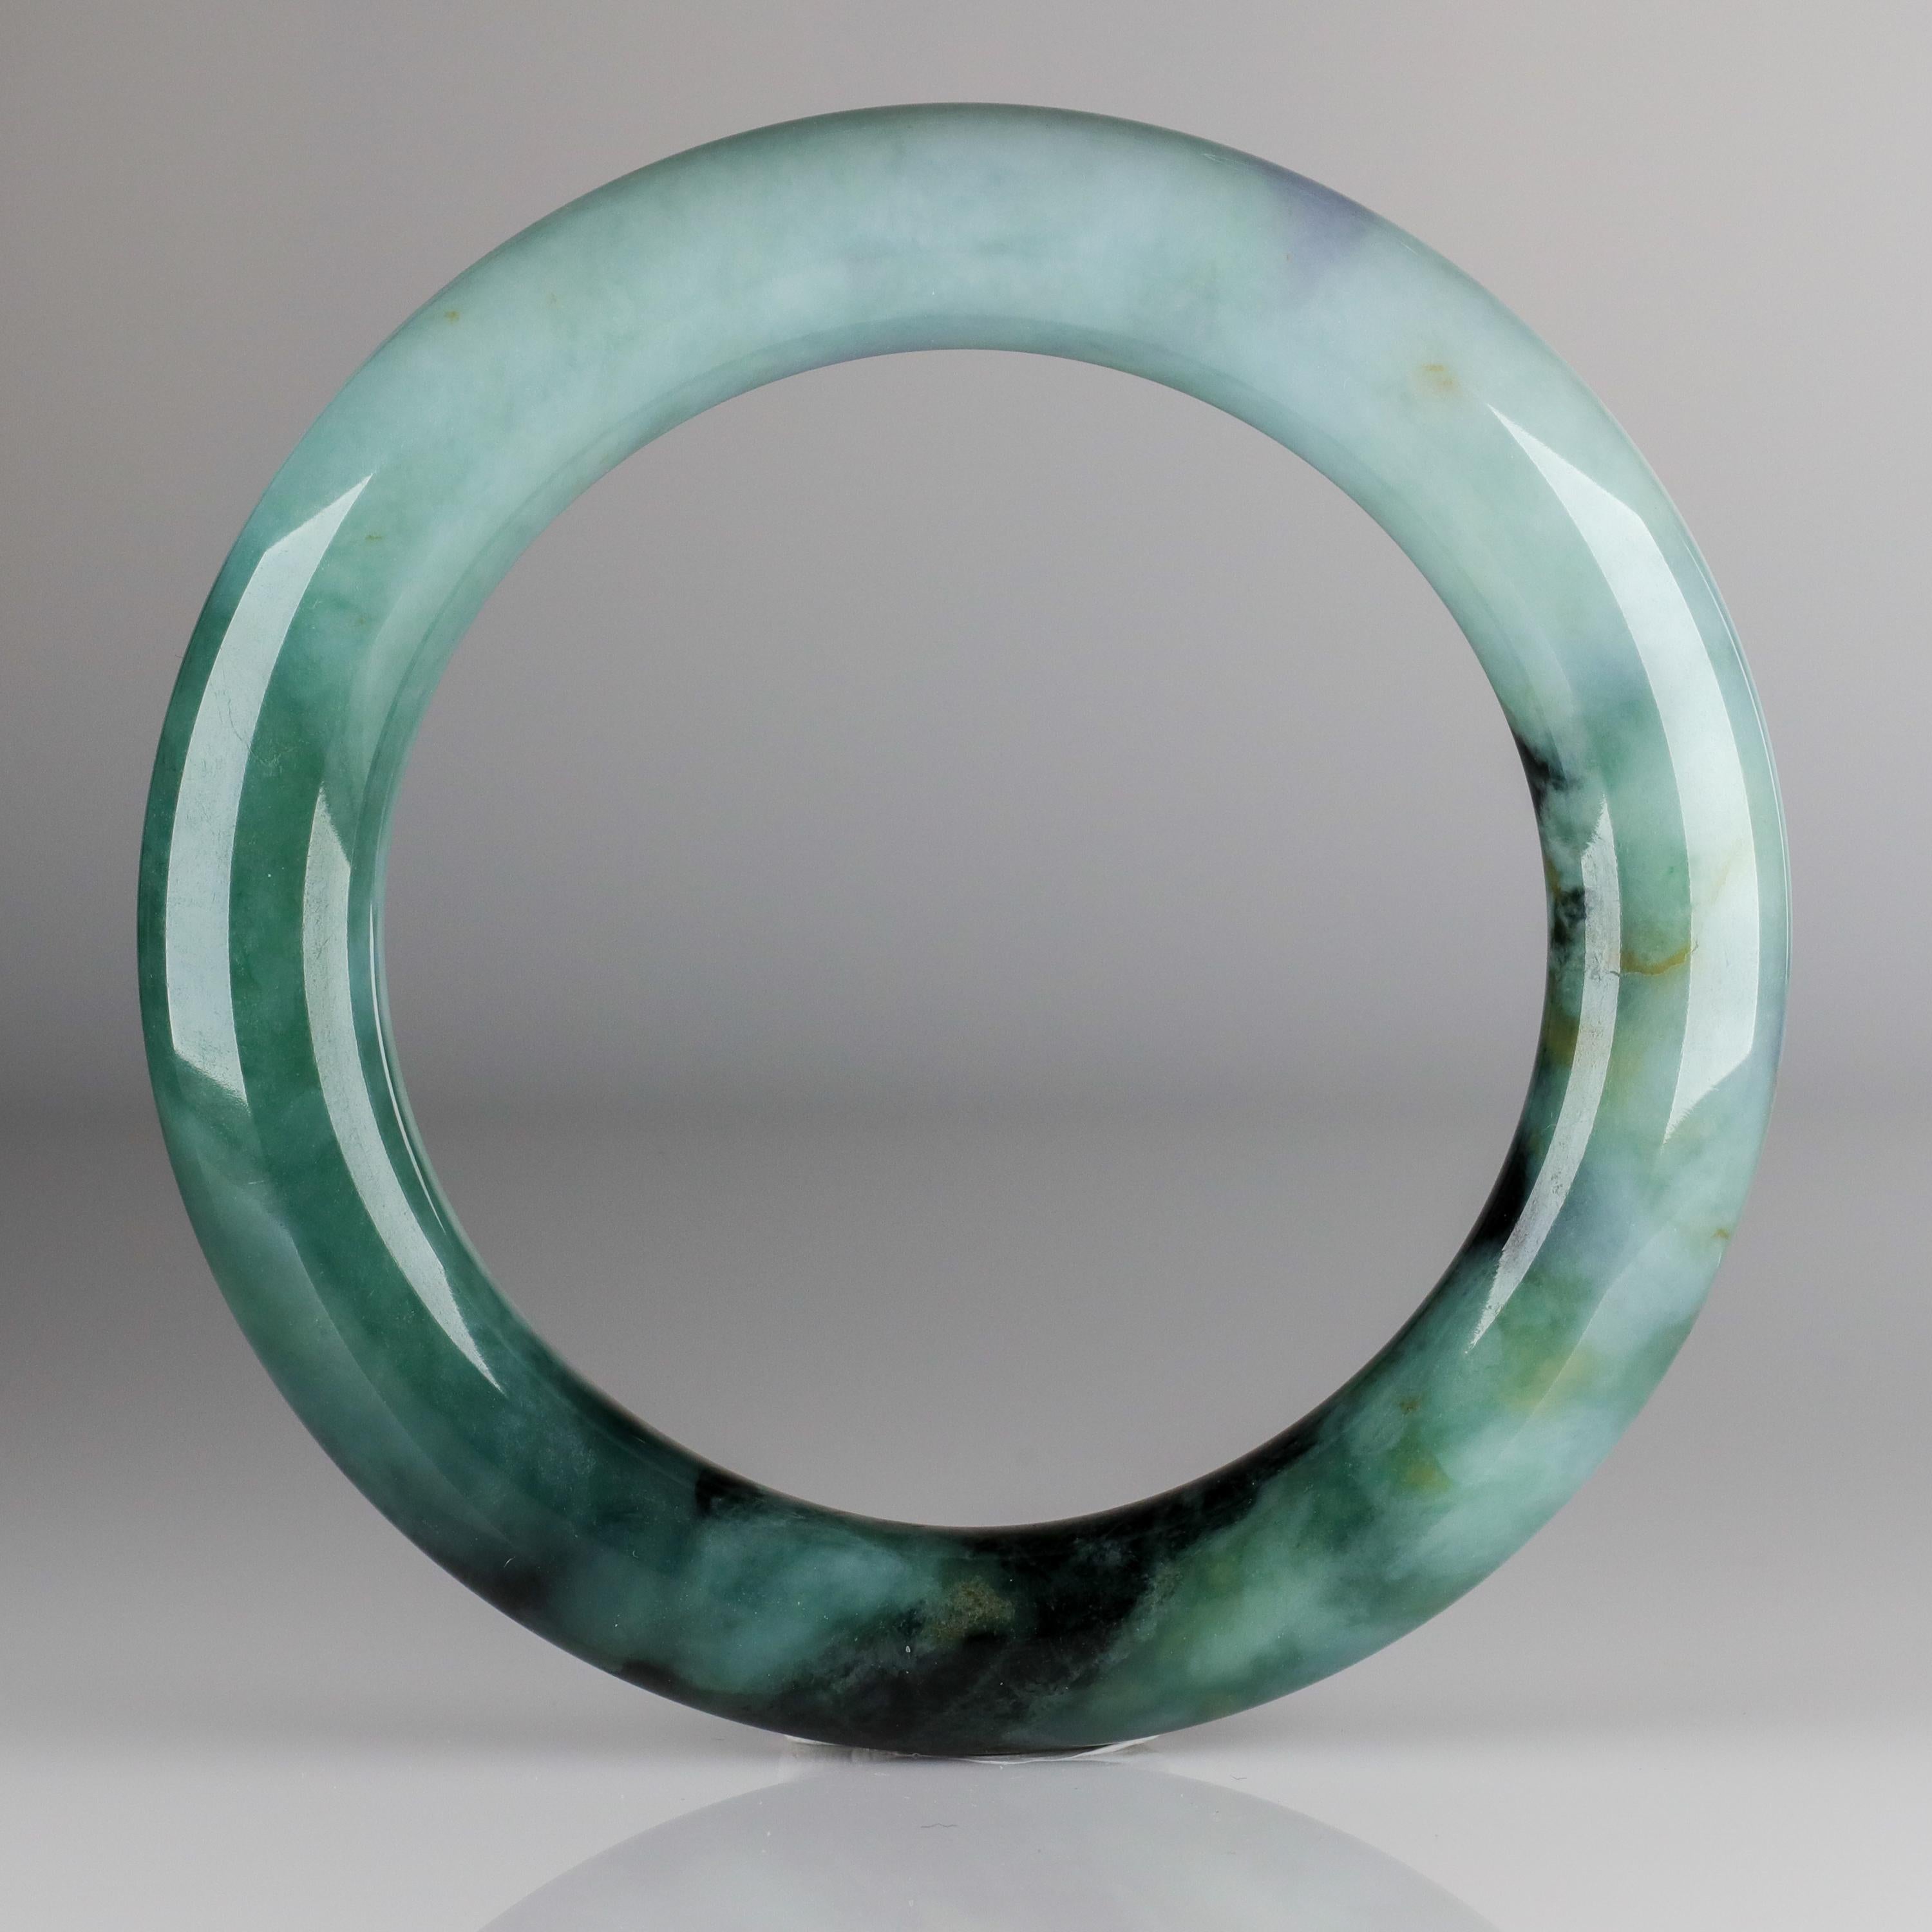 A spectacular certified natural and untreated jadeite jade bangle hand-carved in a larger size, suitable for many men. The average jade bangle hs an inner diameter of between 50-54mm, which fits many women. This bangle has an exterior diameter of